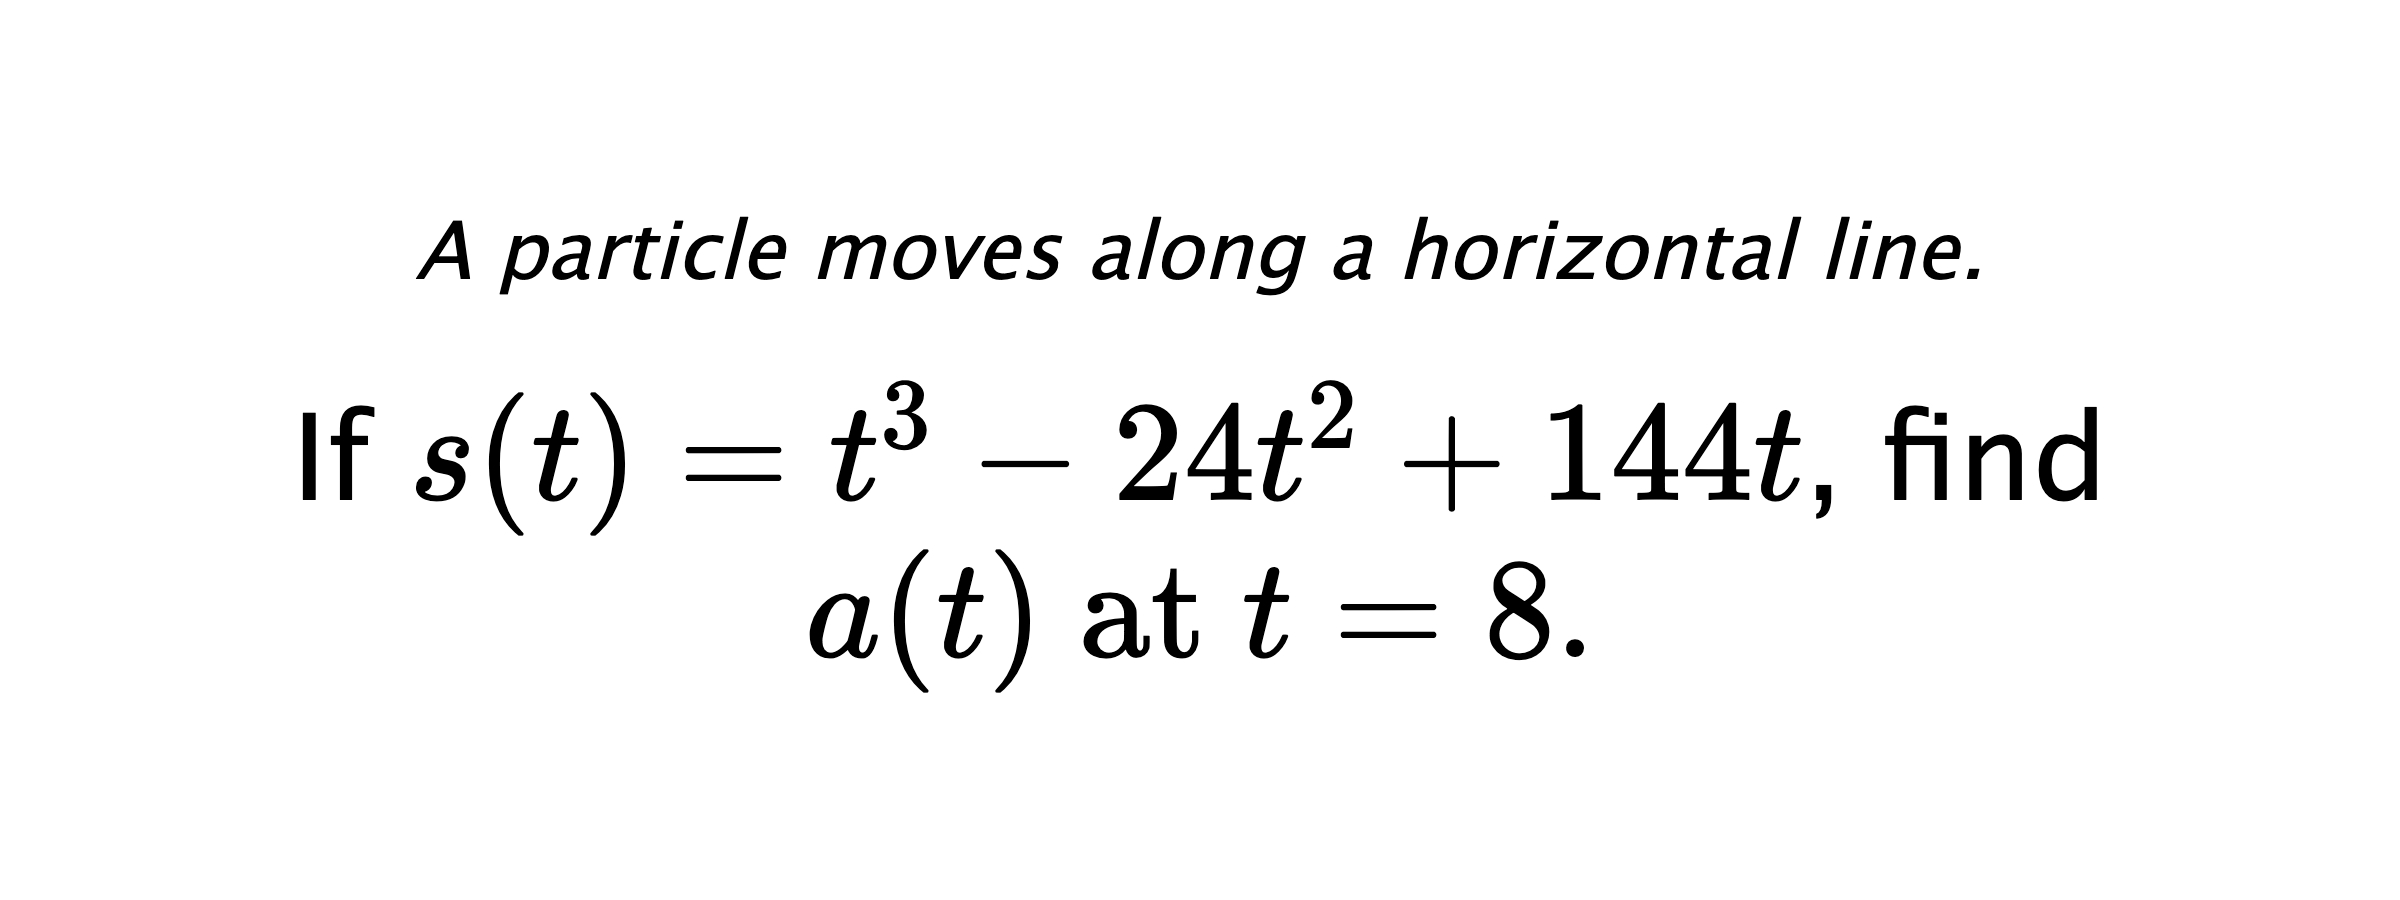 A particle moves along a horizontal line. If $ s(t)=t^3-24t^2+144t $, find $ a(t) \text{ at } t=8. $